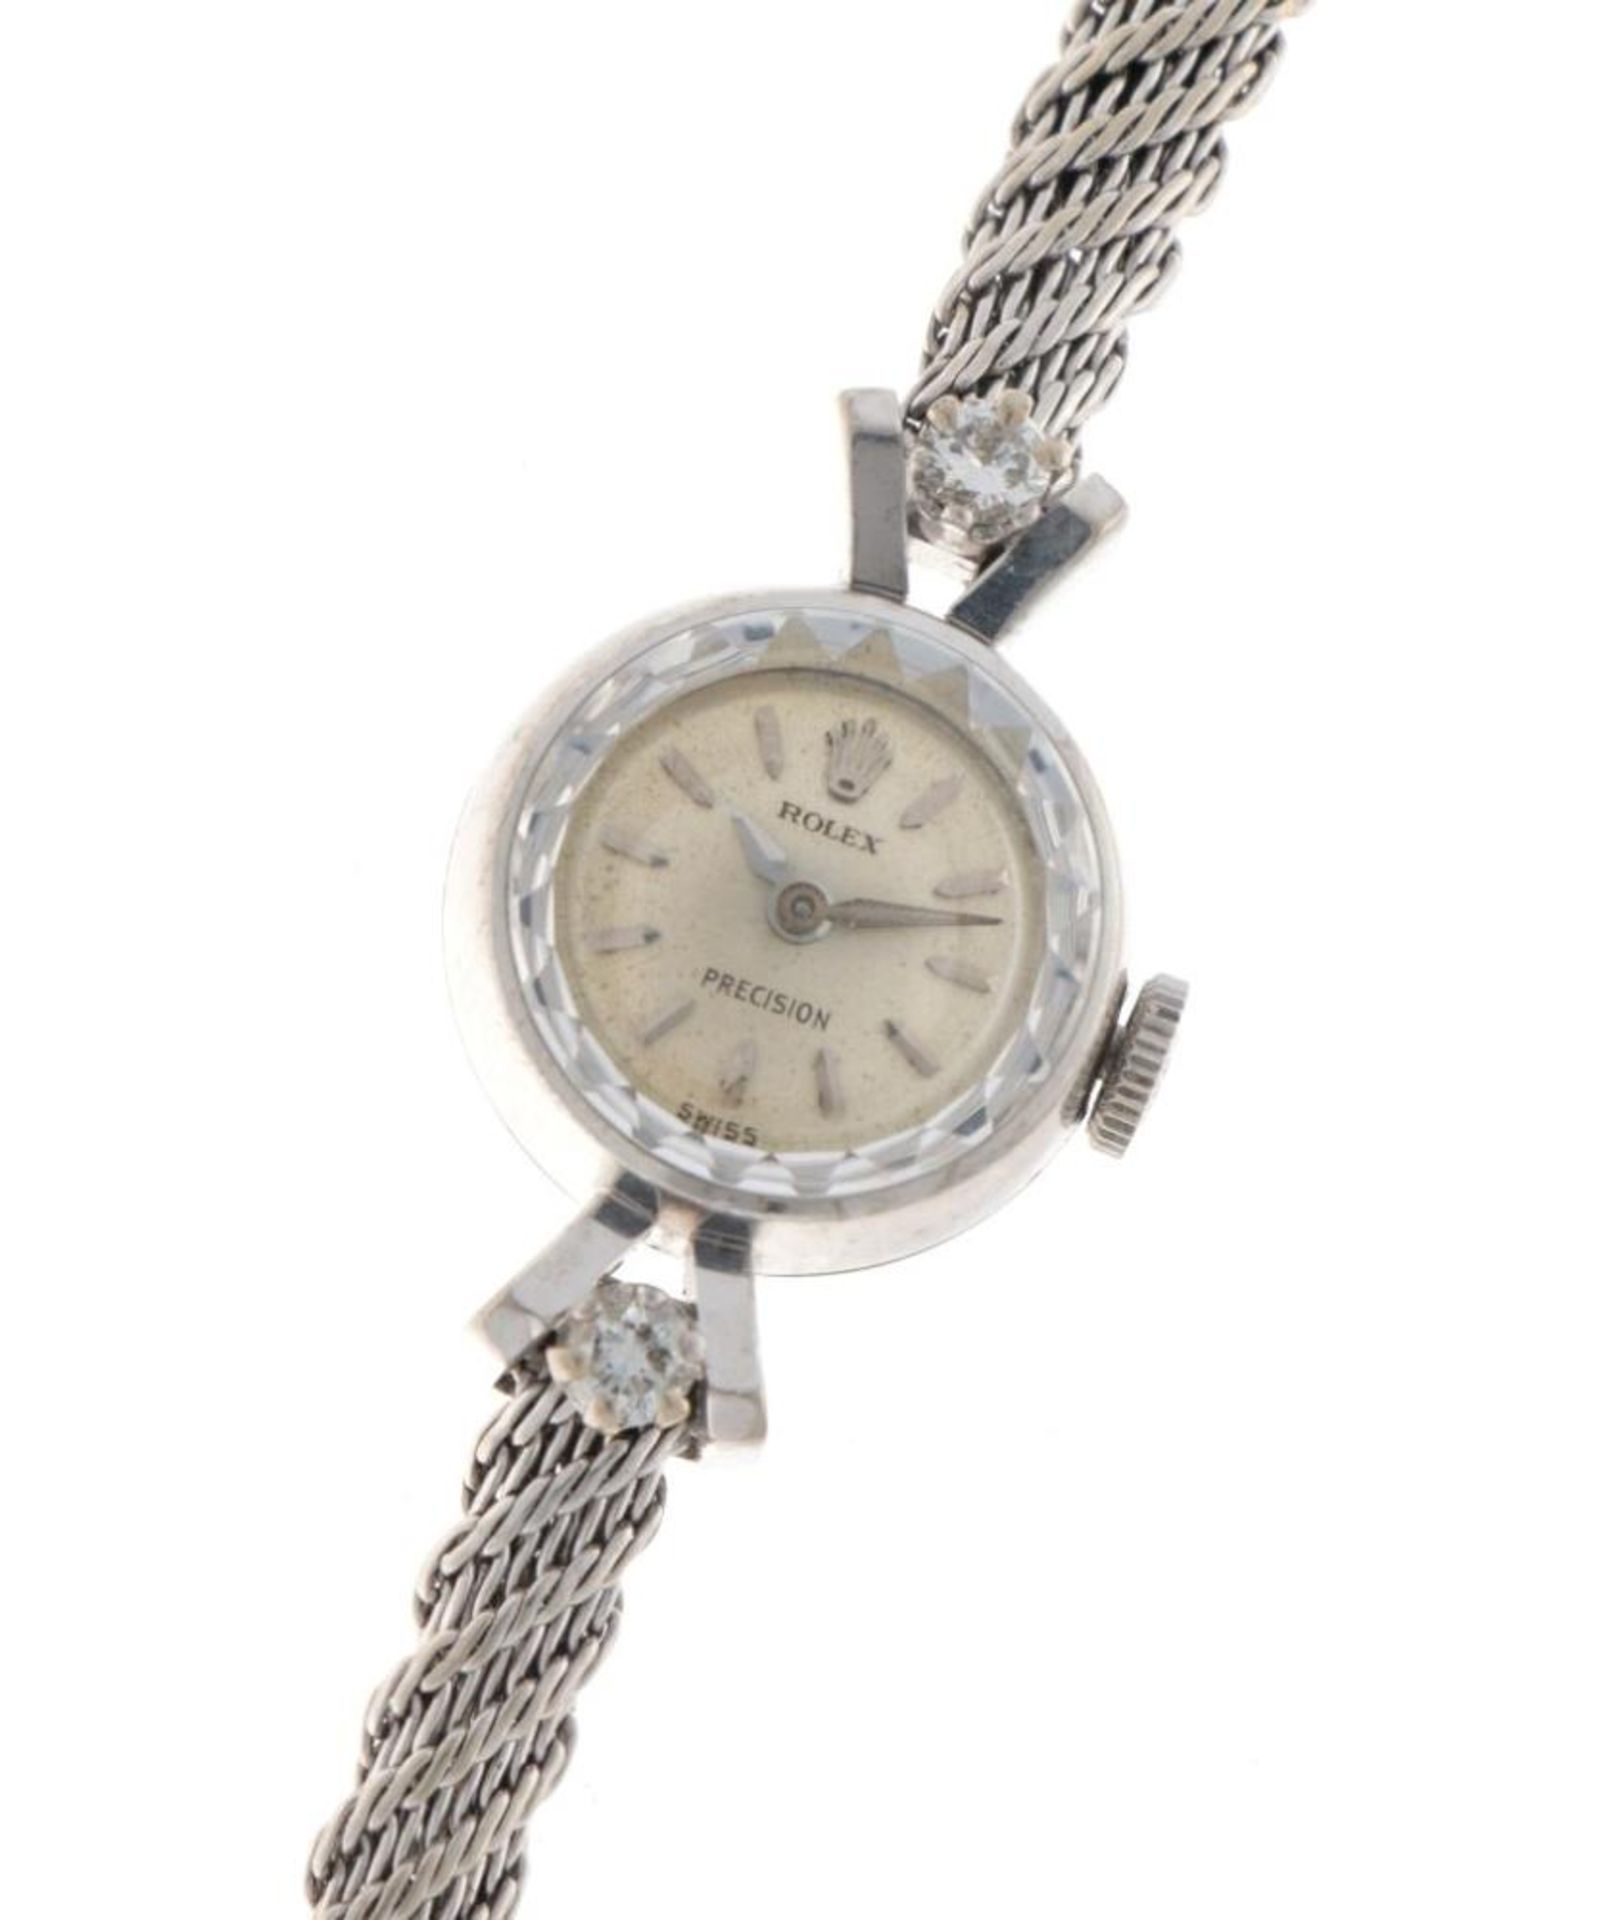 Rolex Precision - Ladies Watch White Gold - appr. 1960 - Image 2 of 9